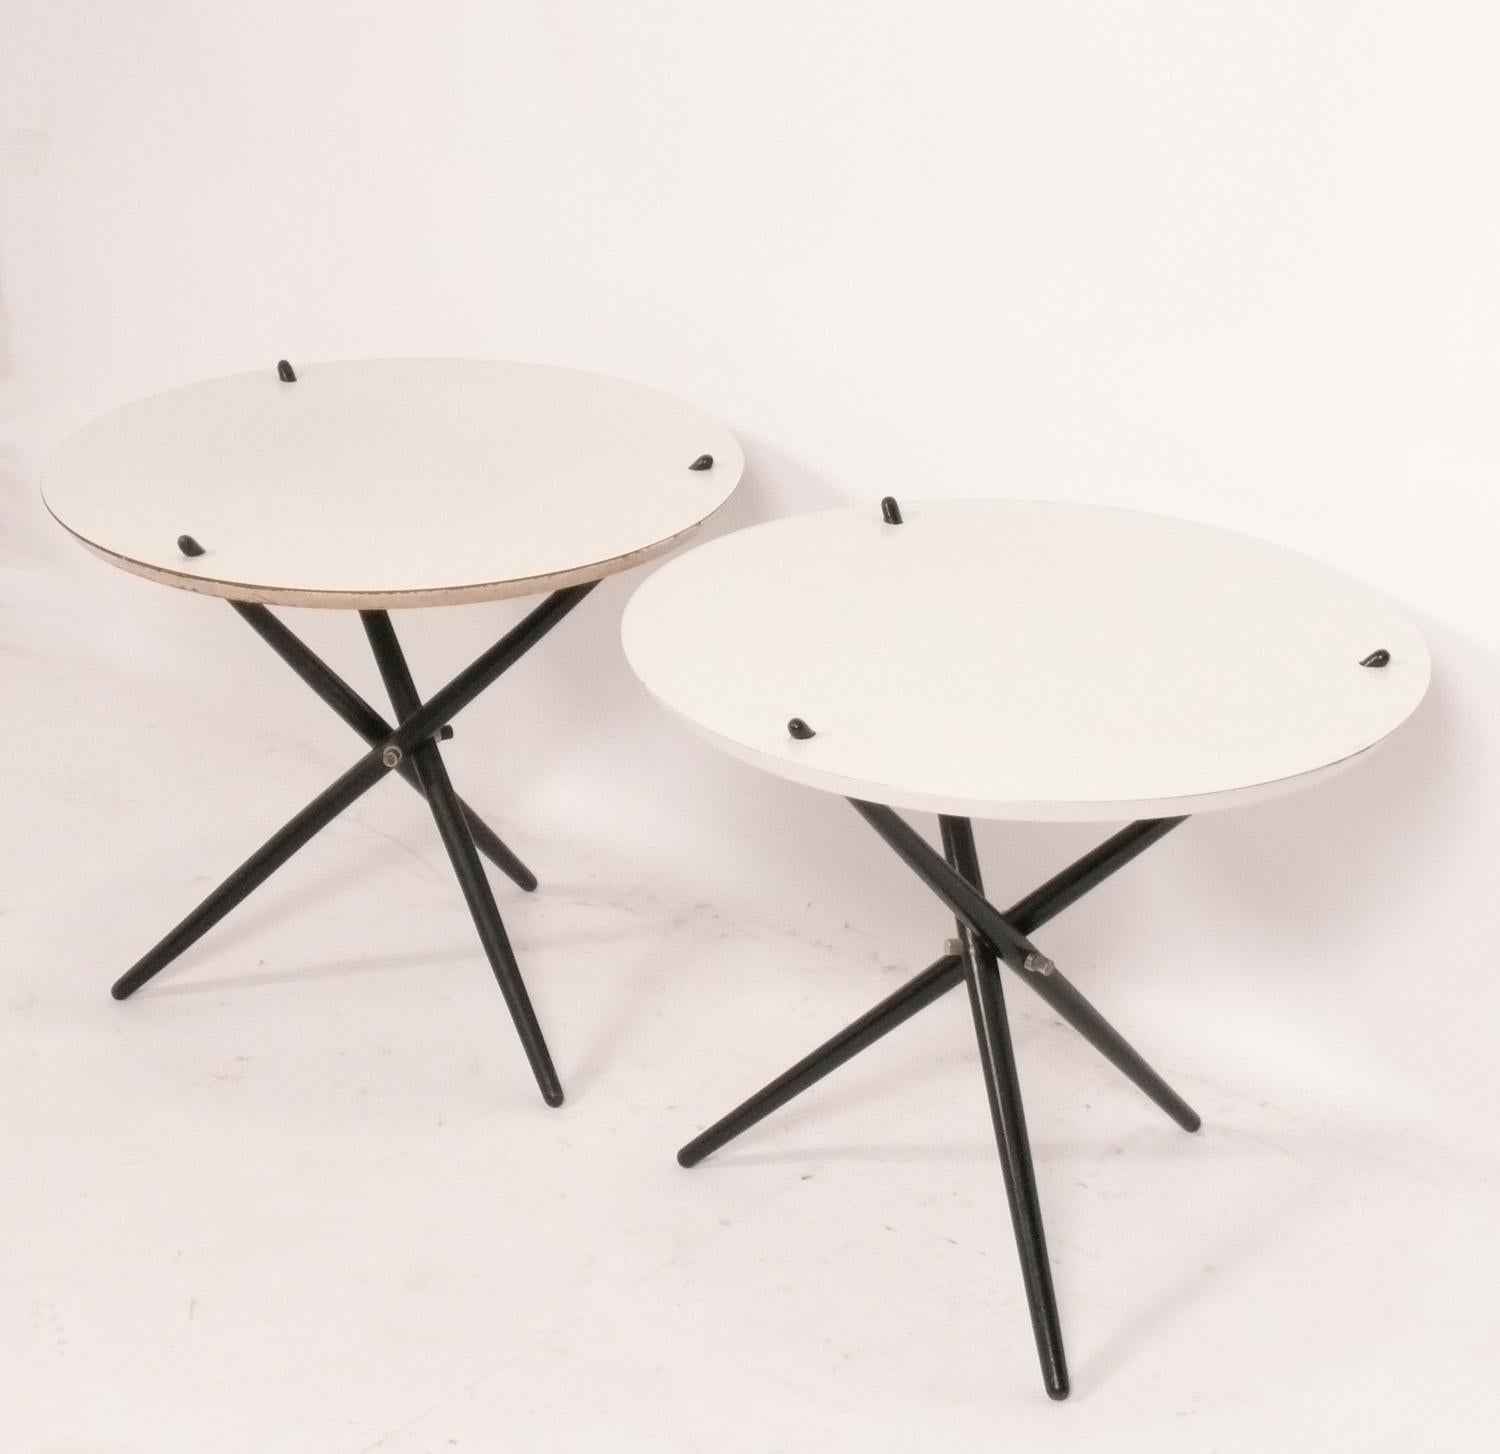 Sculptural Tripod Tables, designed by Hans Bellmann for Knoll, American, circa 1960s. They are a versatile size and can be used as side or end tables, or as nightstands. Low maintenance white laminate tops with black lacquered legs.